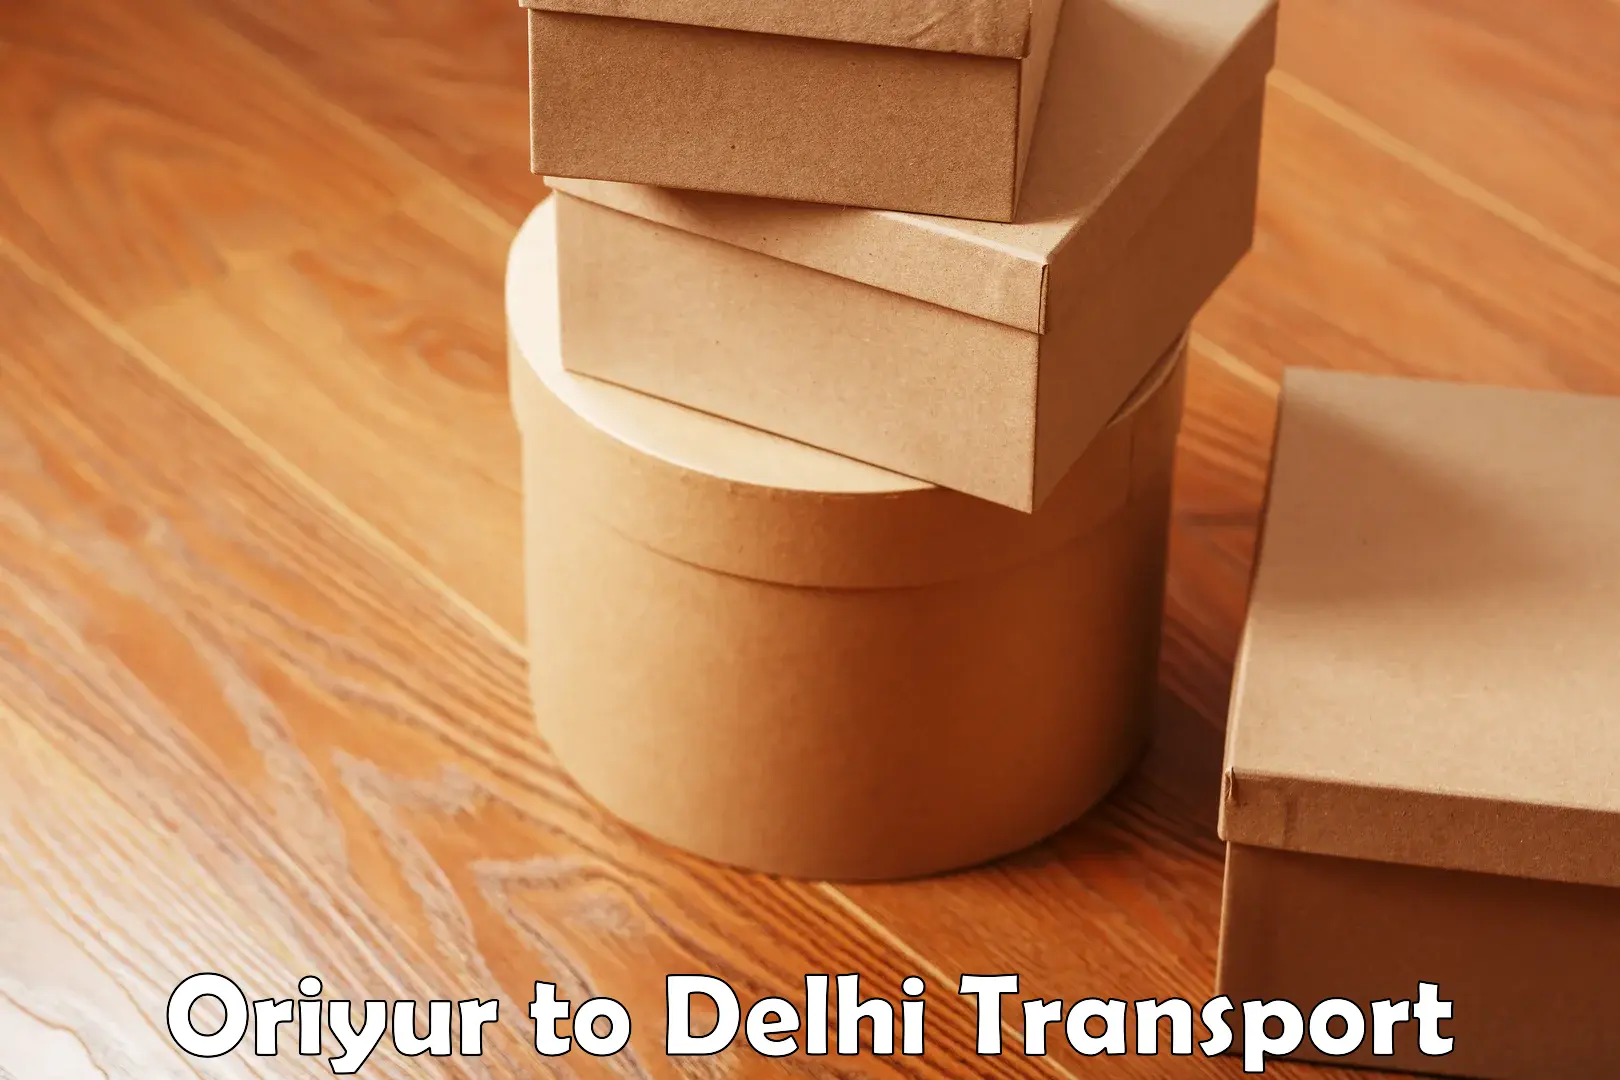 Daily parcel service transport Oriyur to NCR